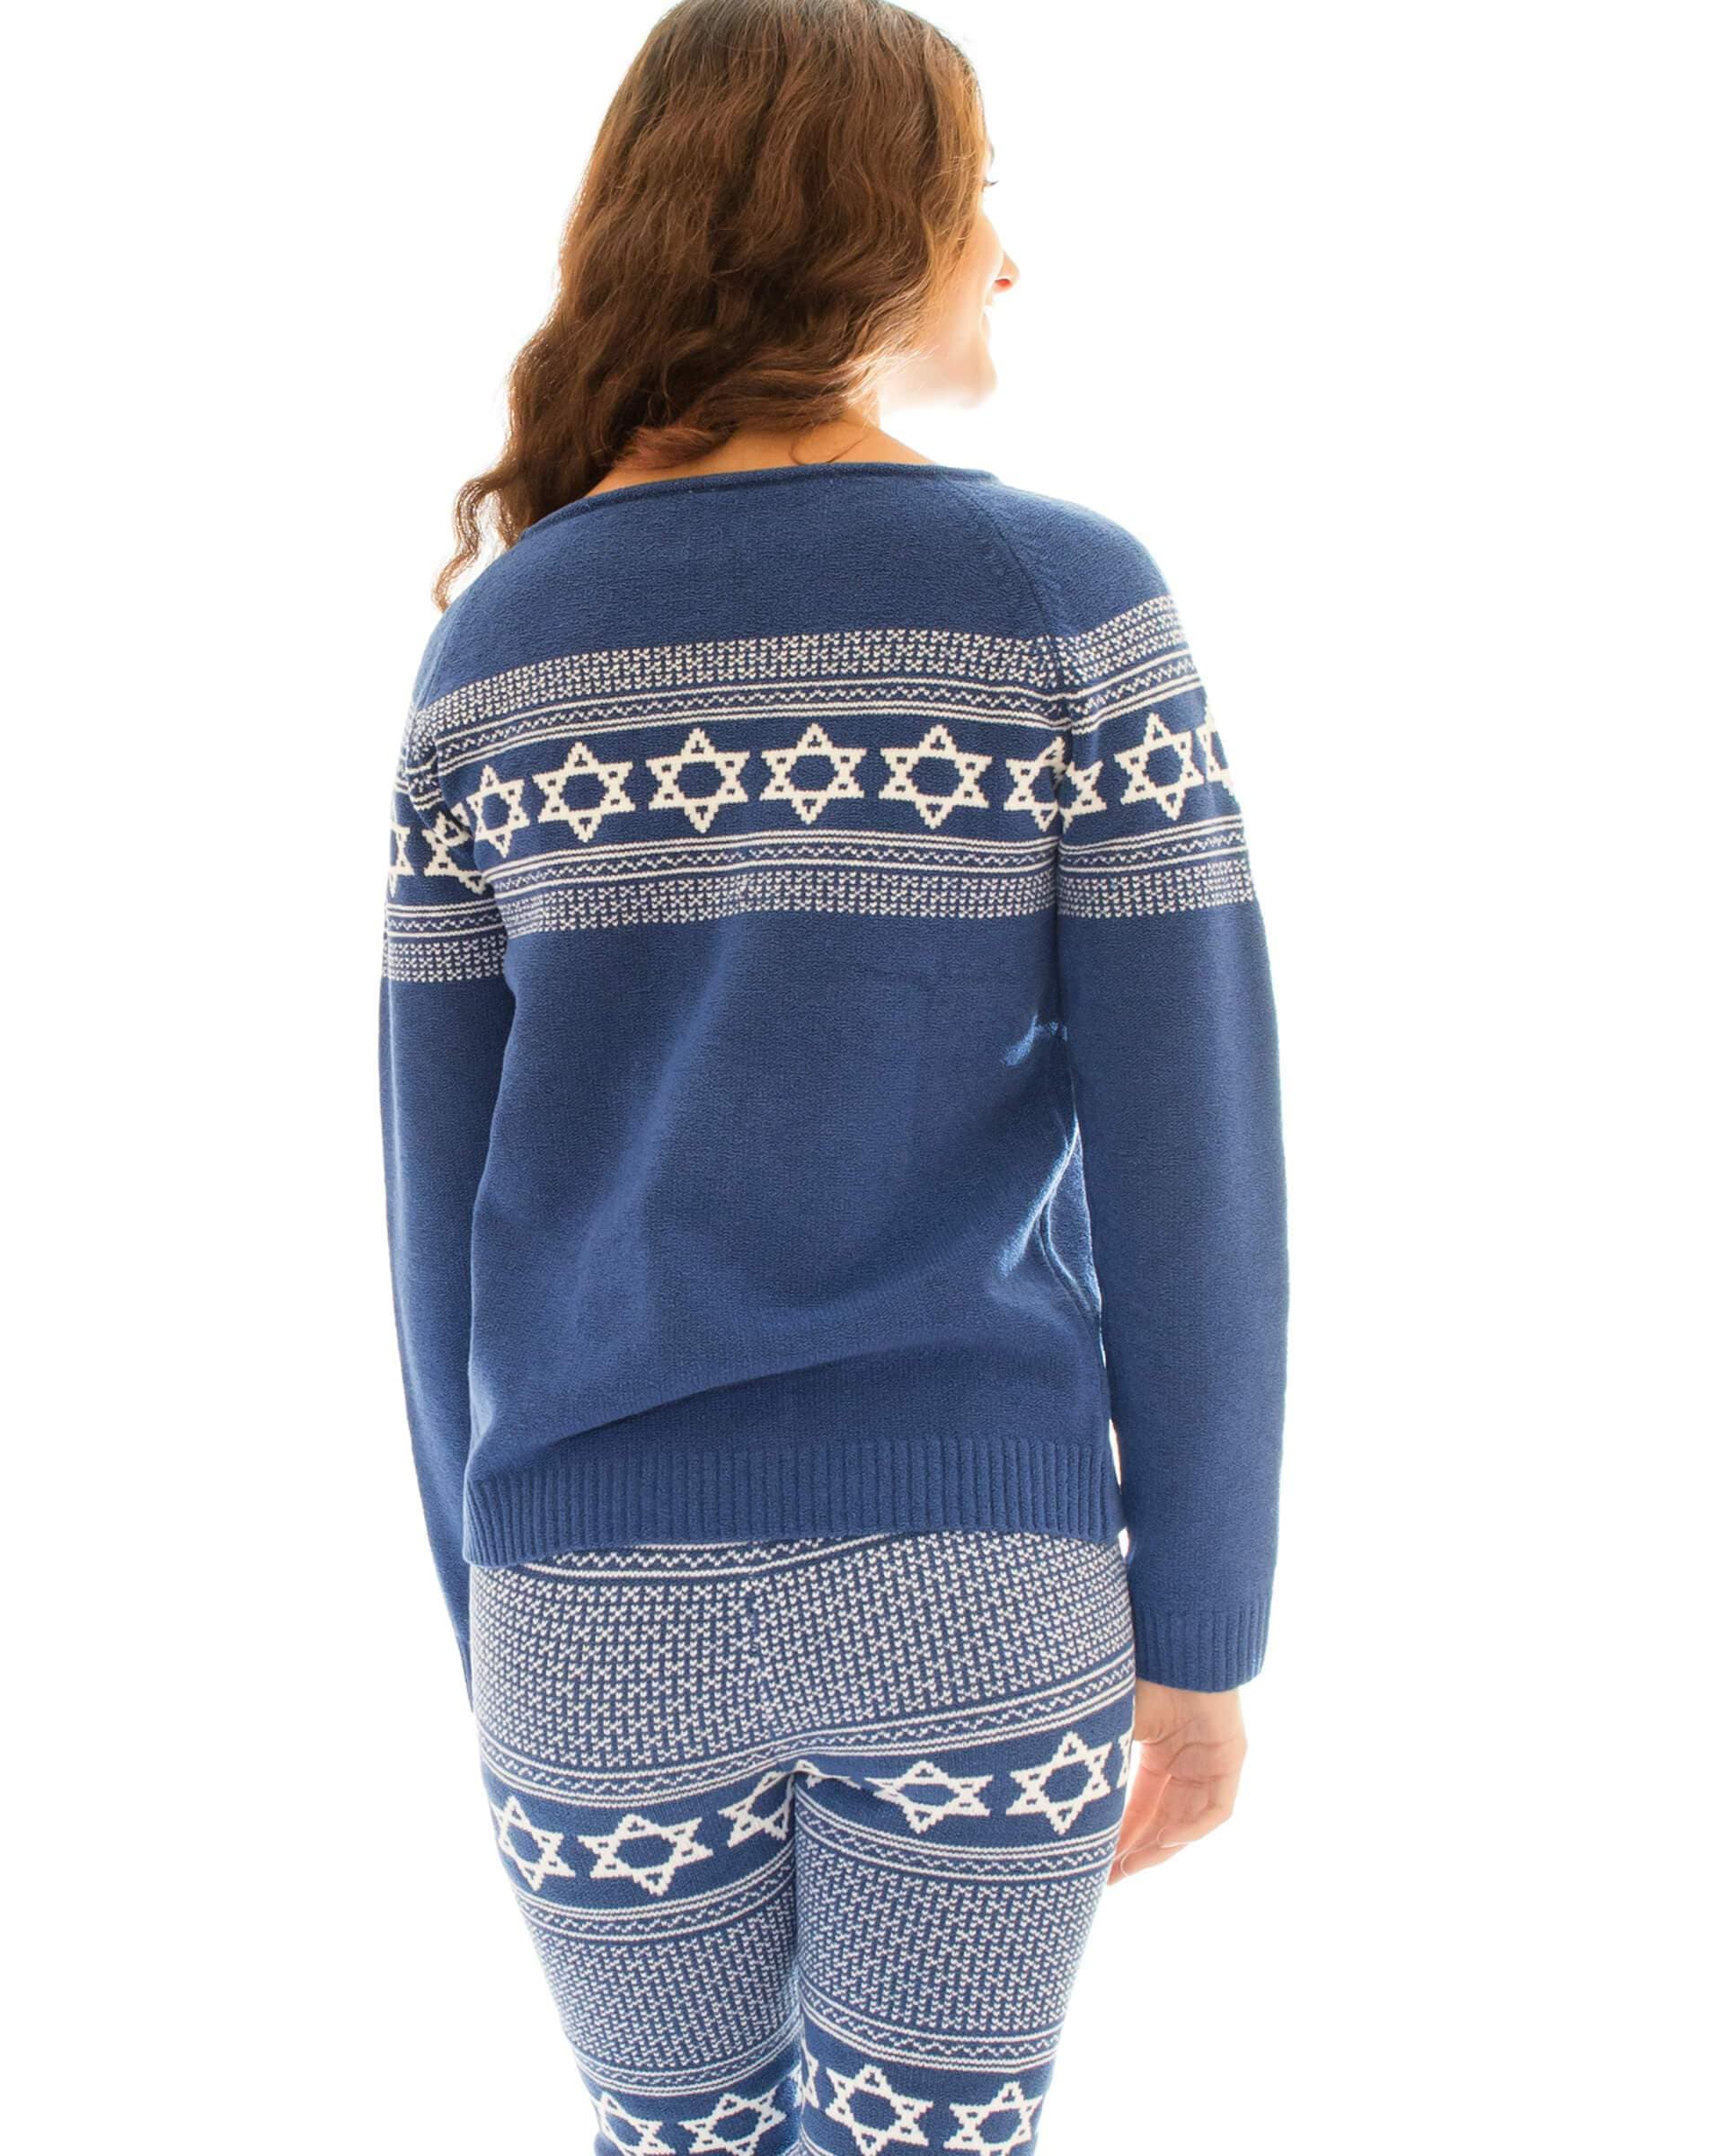 Knitty Kitty Sweaters Star of David Blue and White Sweater